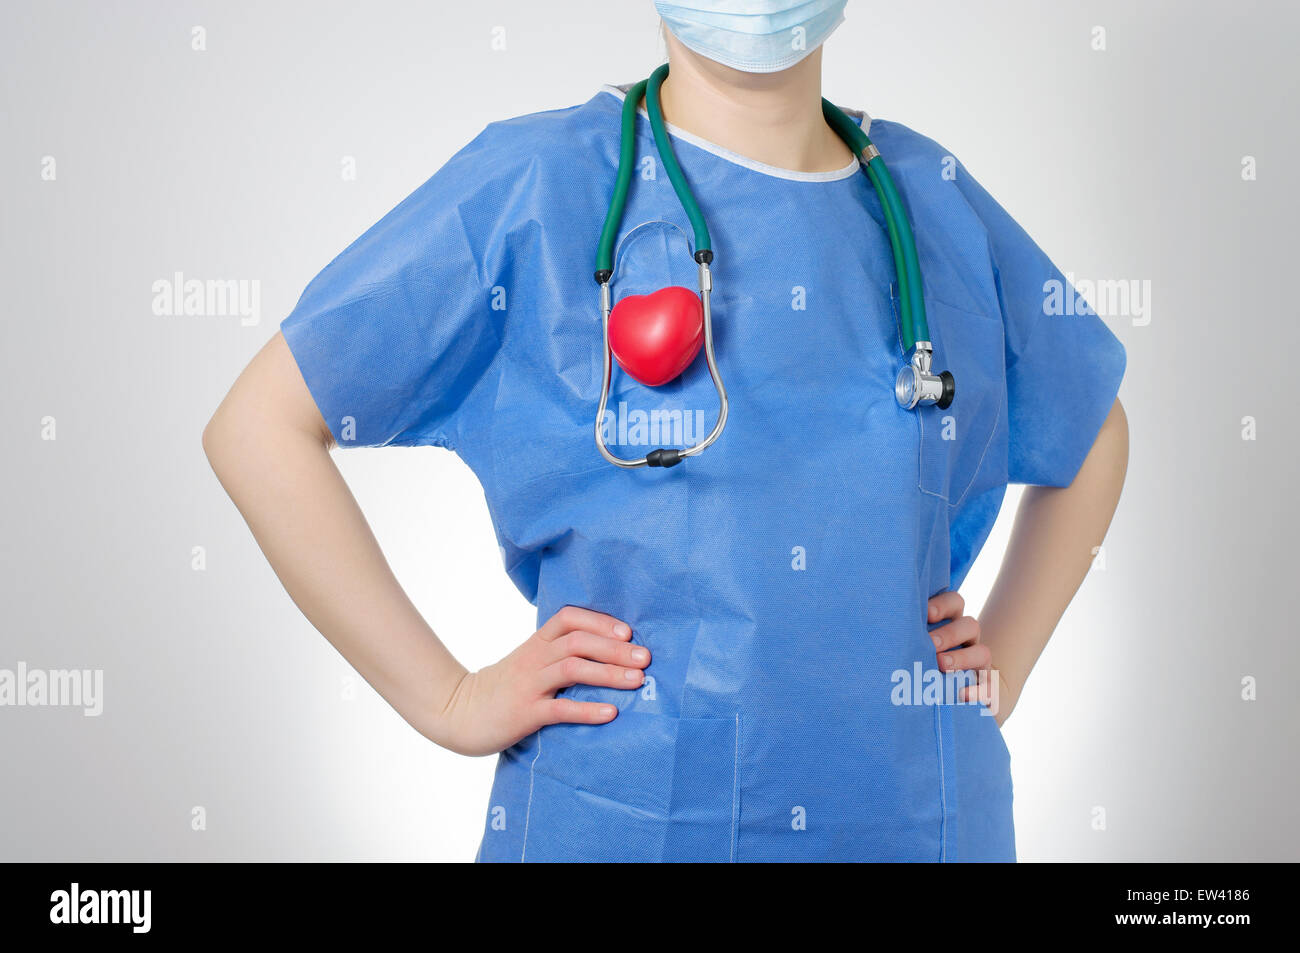 Surgeon with a red heart shape and stethoscope Stock Photo